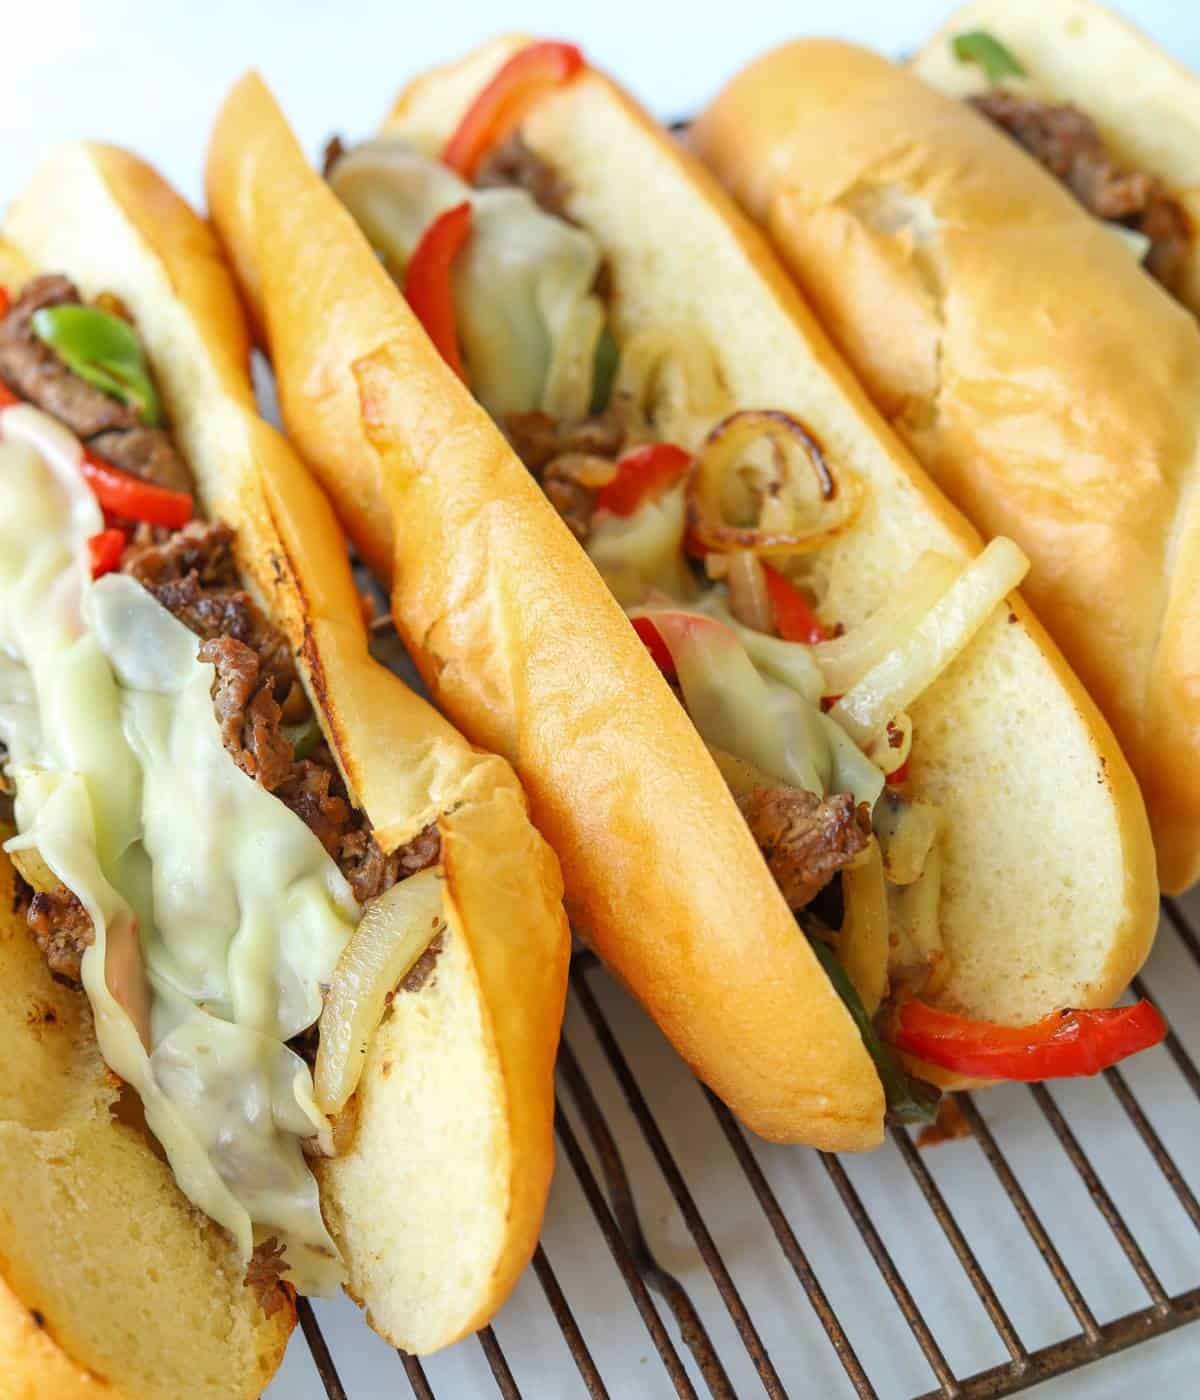 Hoagie rolls loaded with meat, cheese, peppers and onions for the perfect cheesesteak.